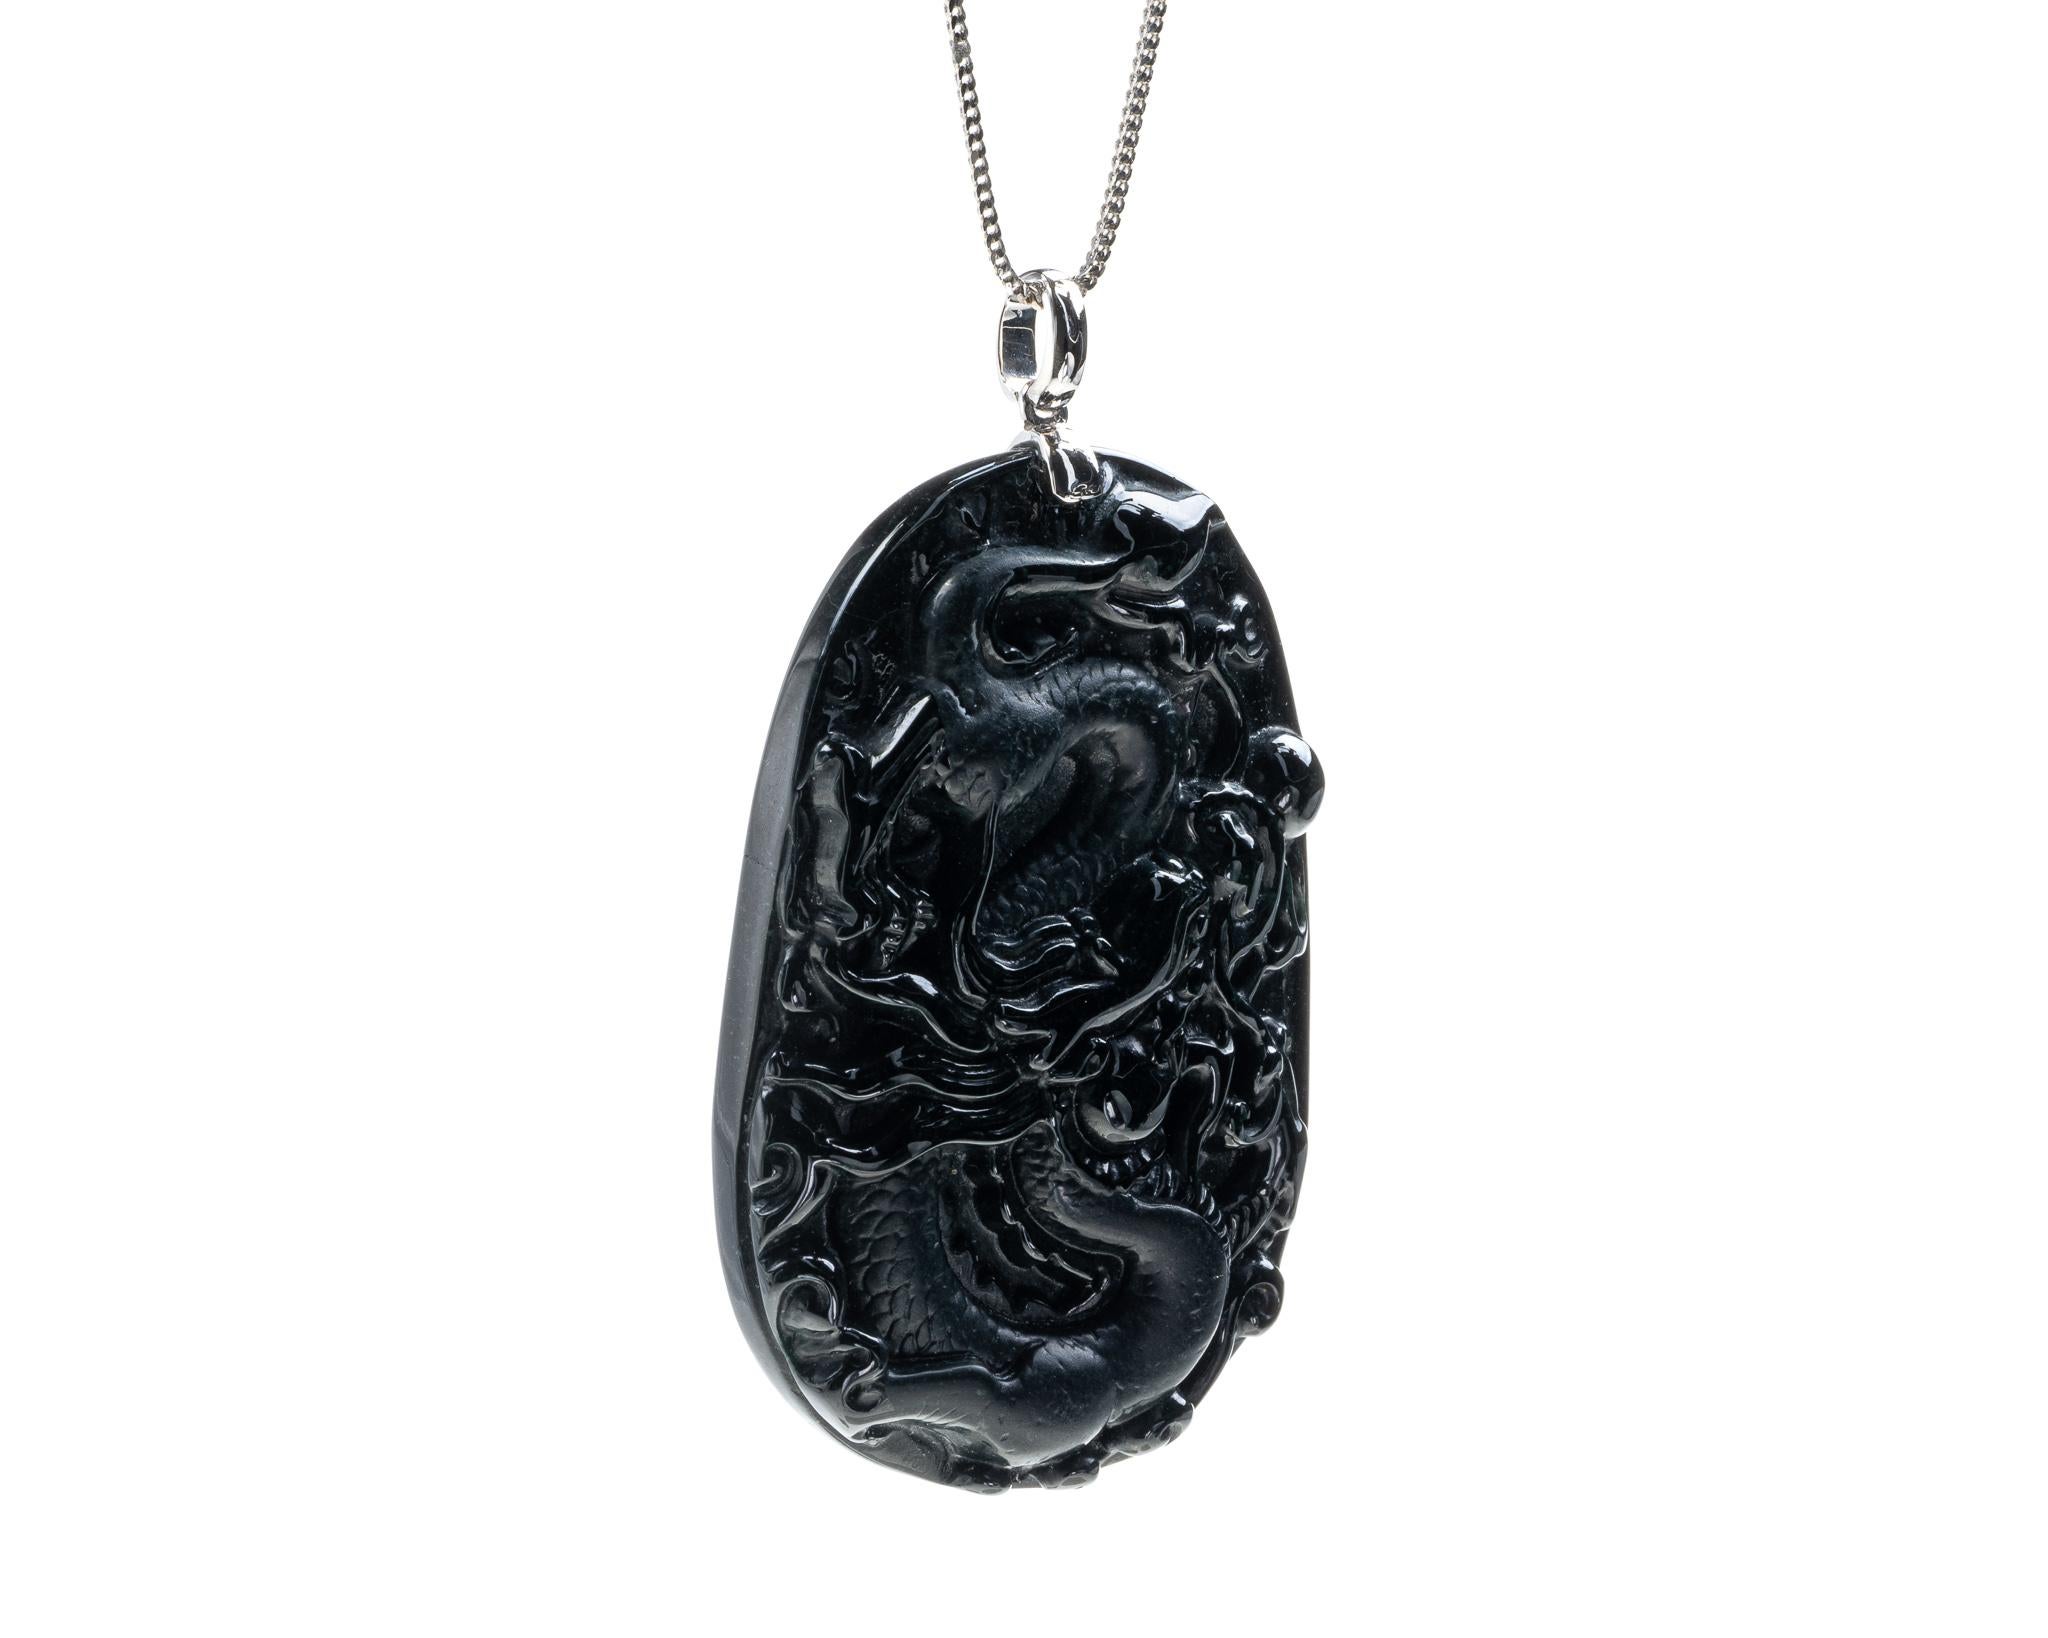 This is an all natural, untreated jadeite jade carved dragon pendant set on an 18K white gold bail.  The carved dragon symbolizes great power, good luck and strength.   

It measures 2.12 inches (54 mm) x 1.48 inches (37.6 mm) with thickness of 0.25